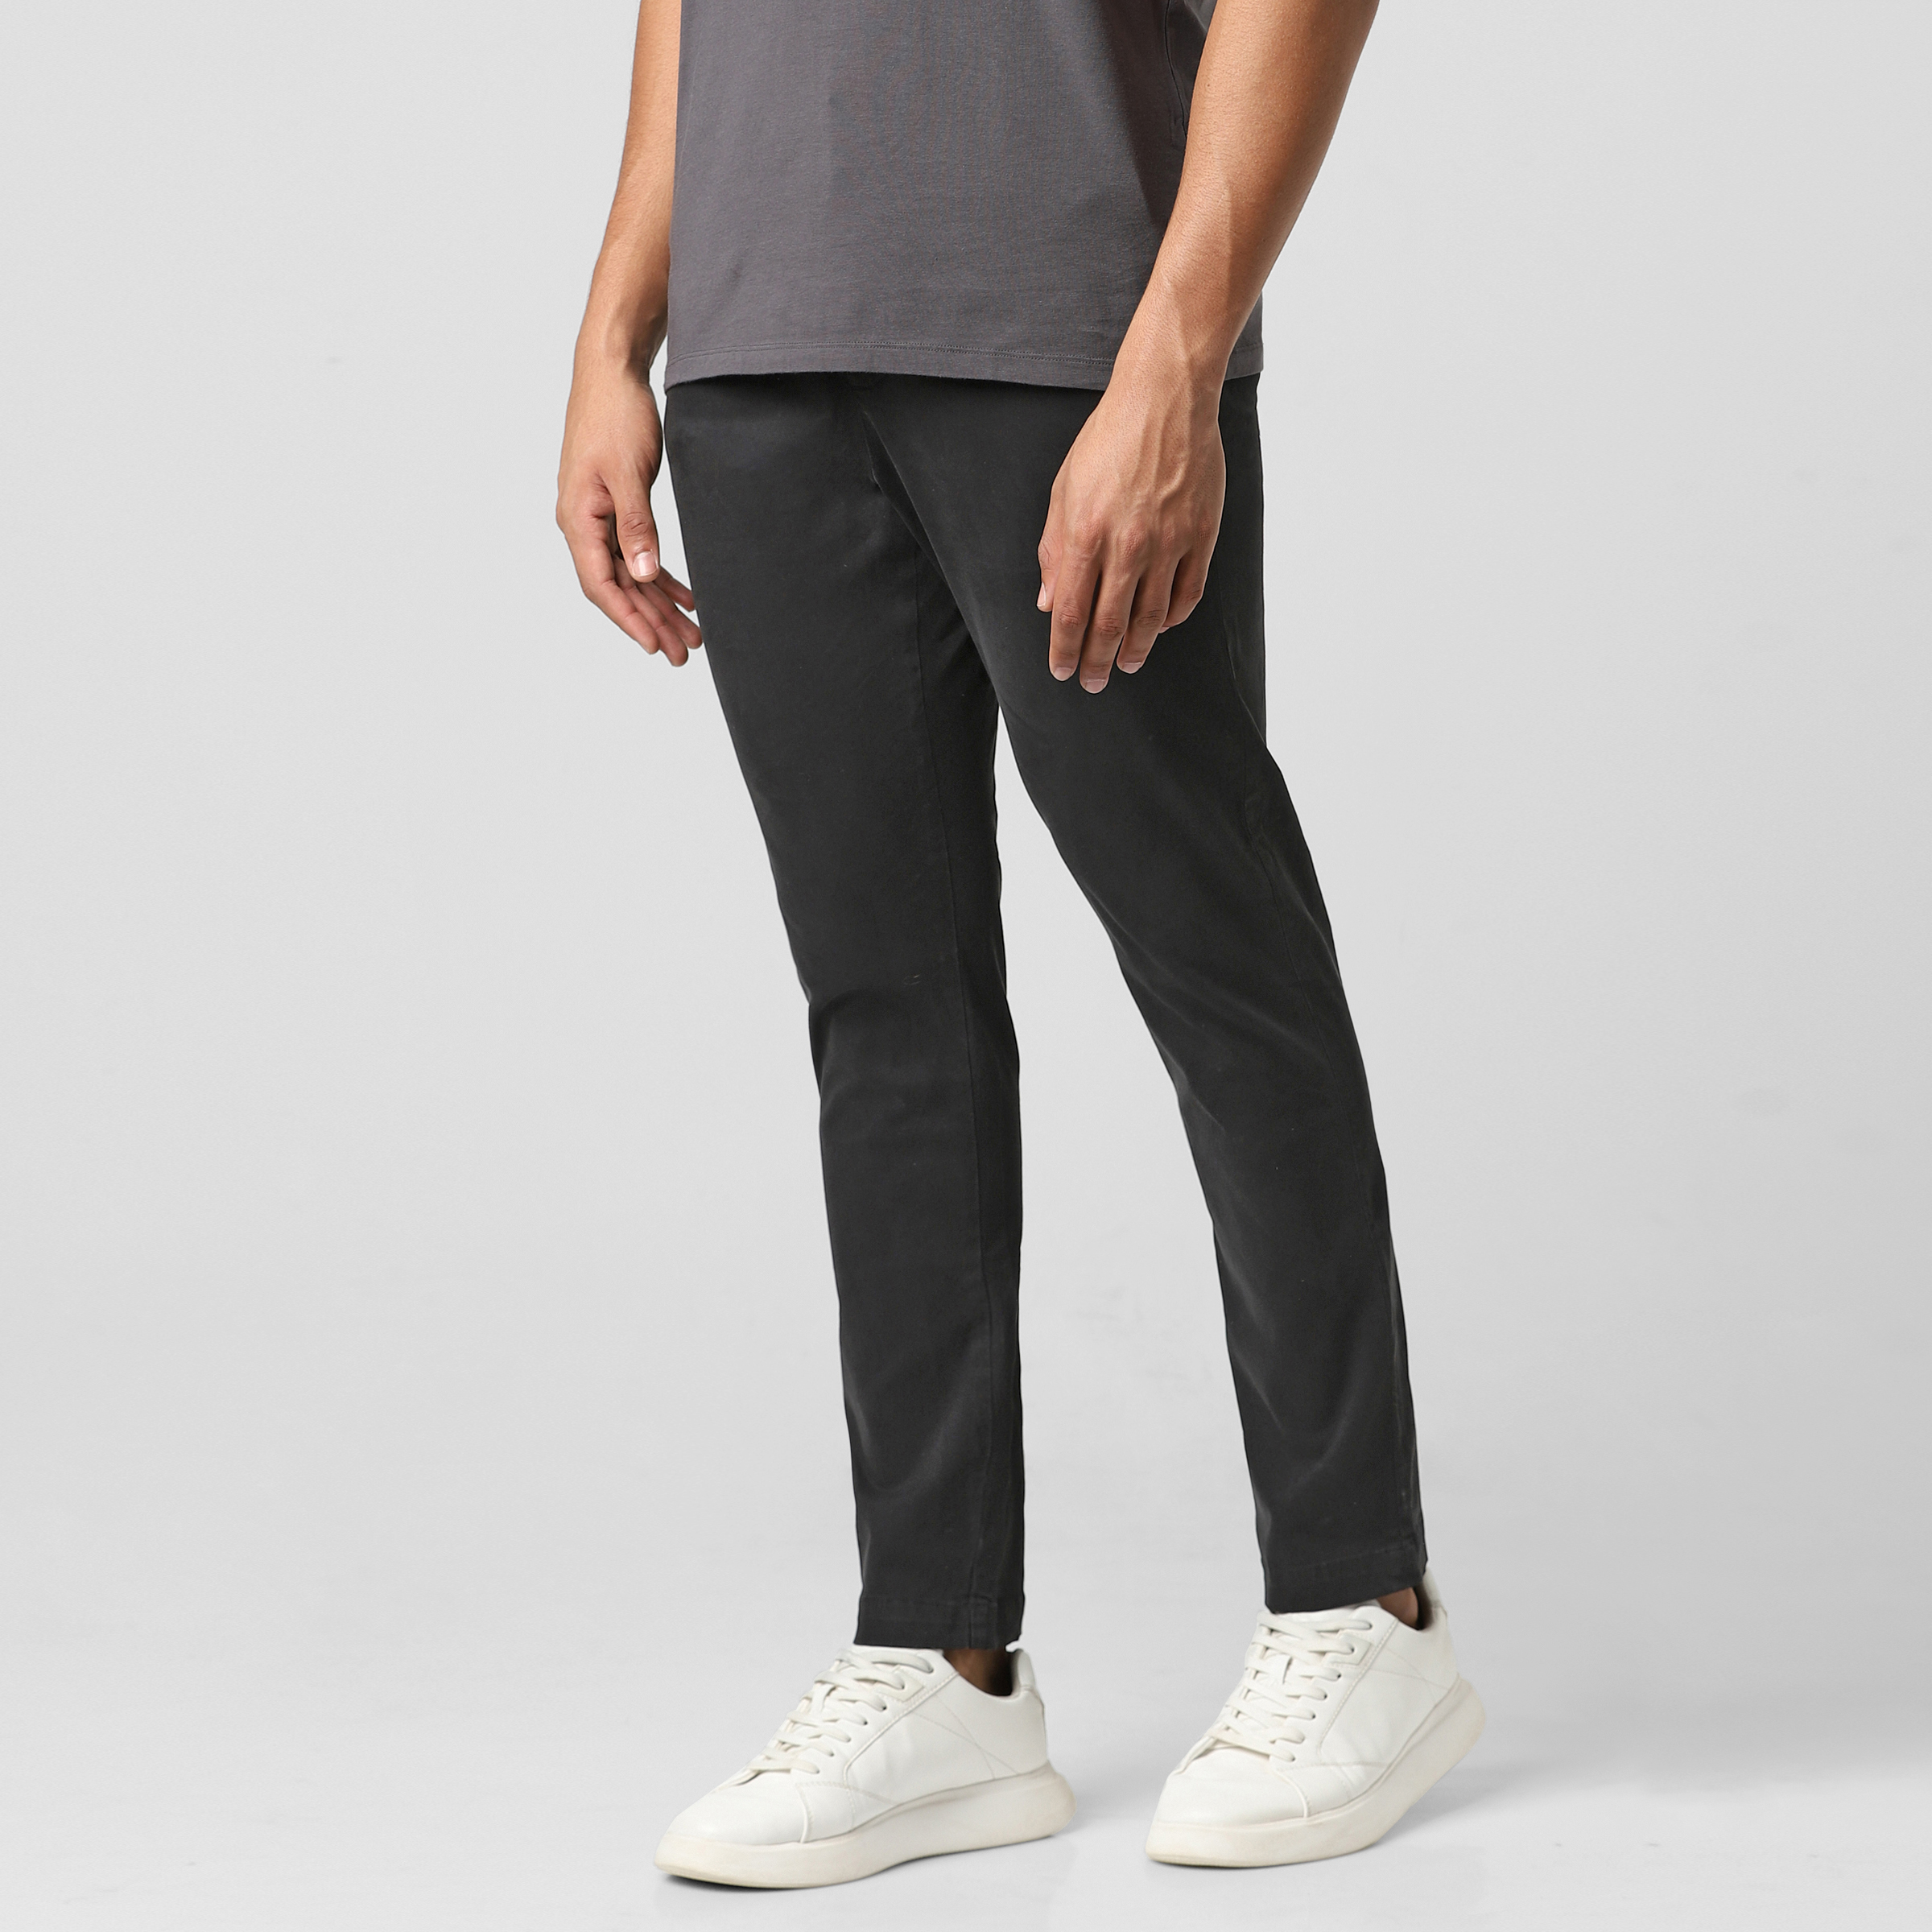 Stretch Chino Pant Black side on model